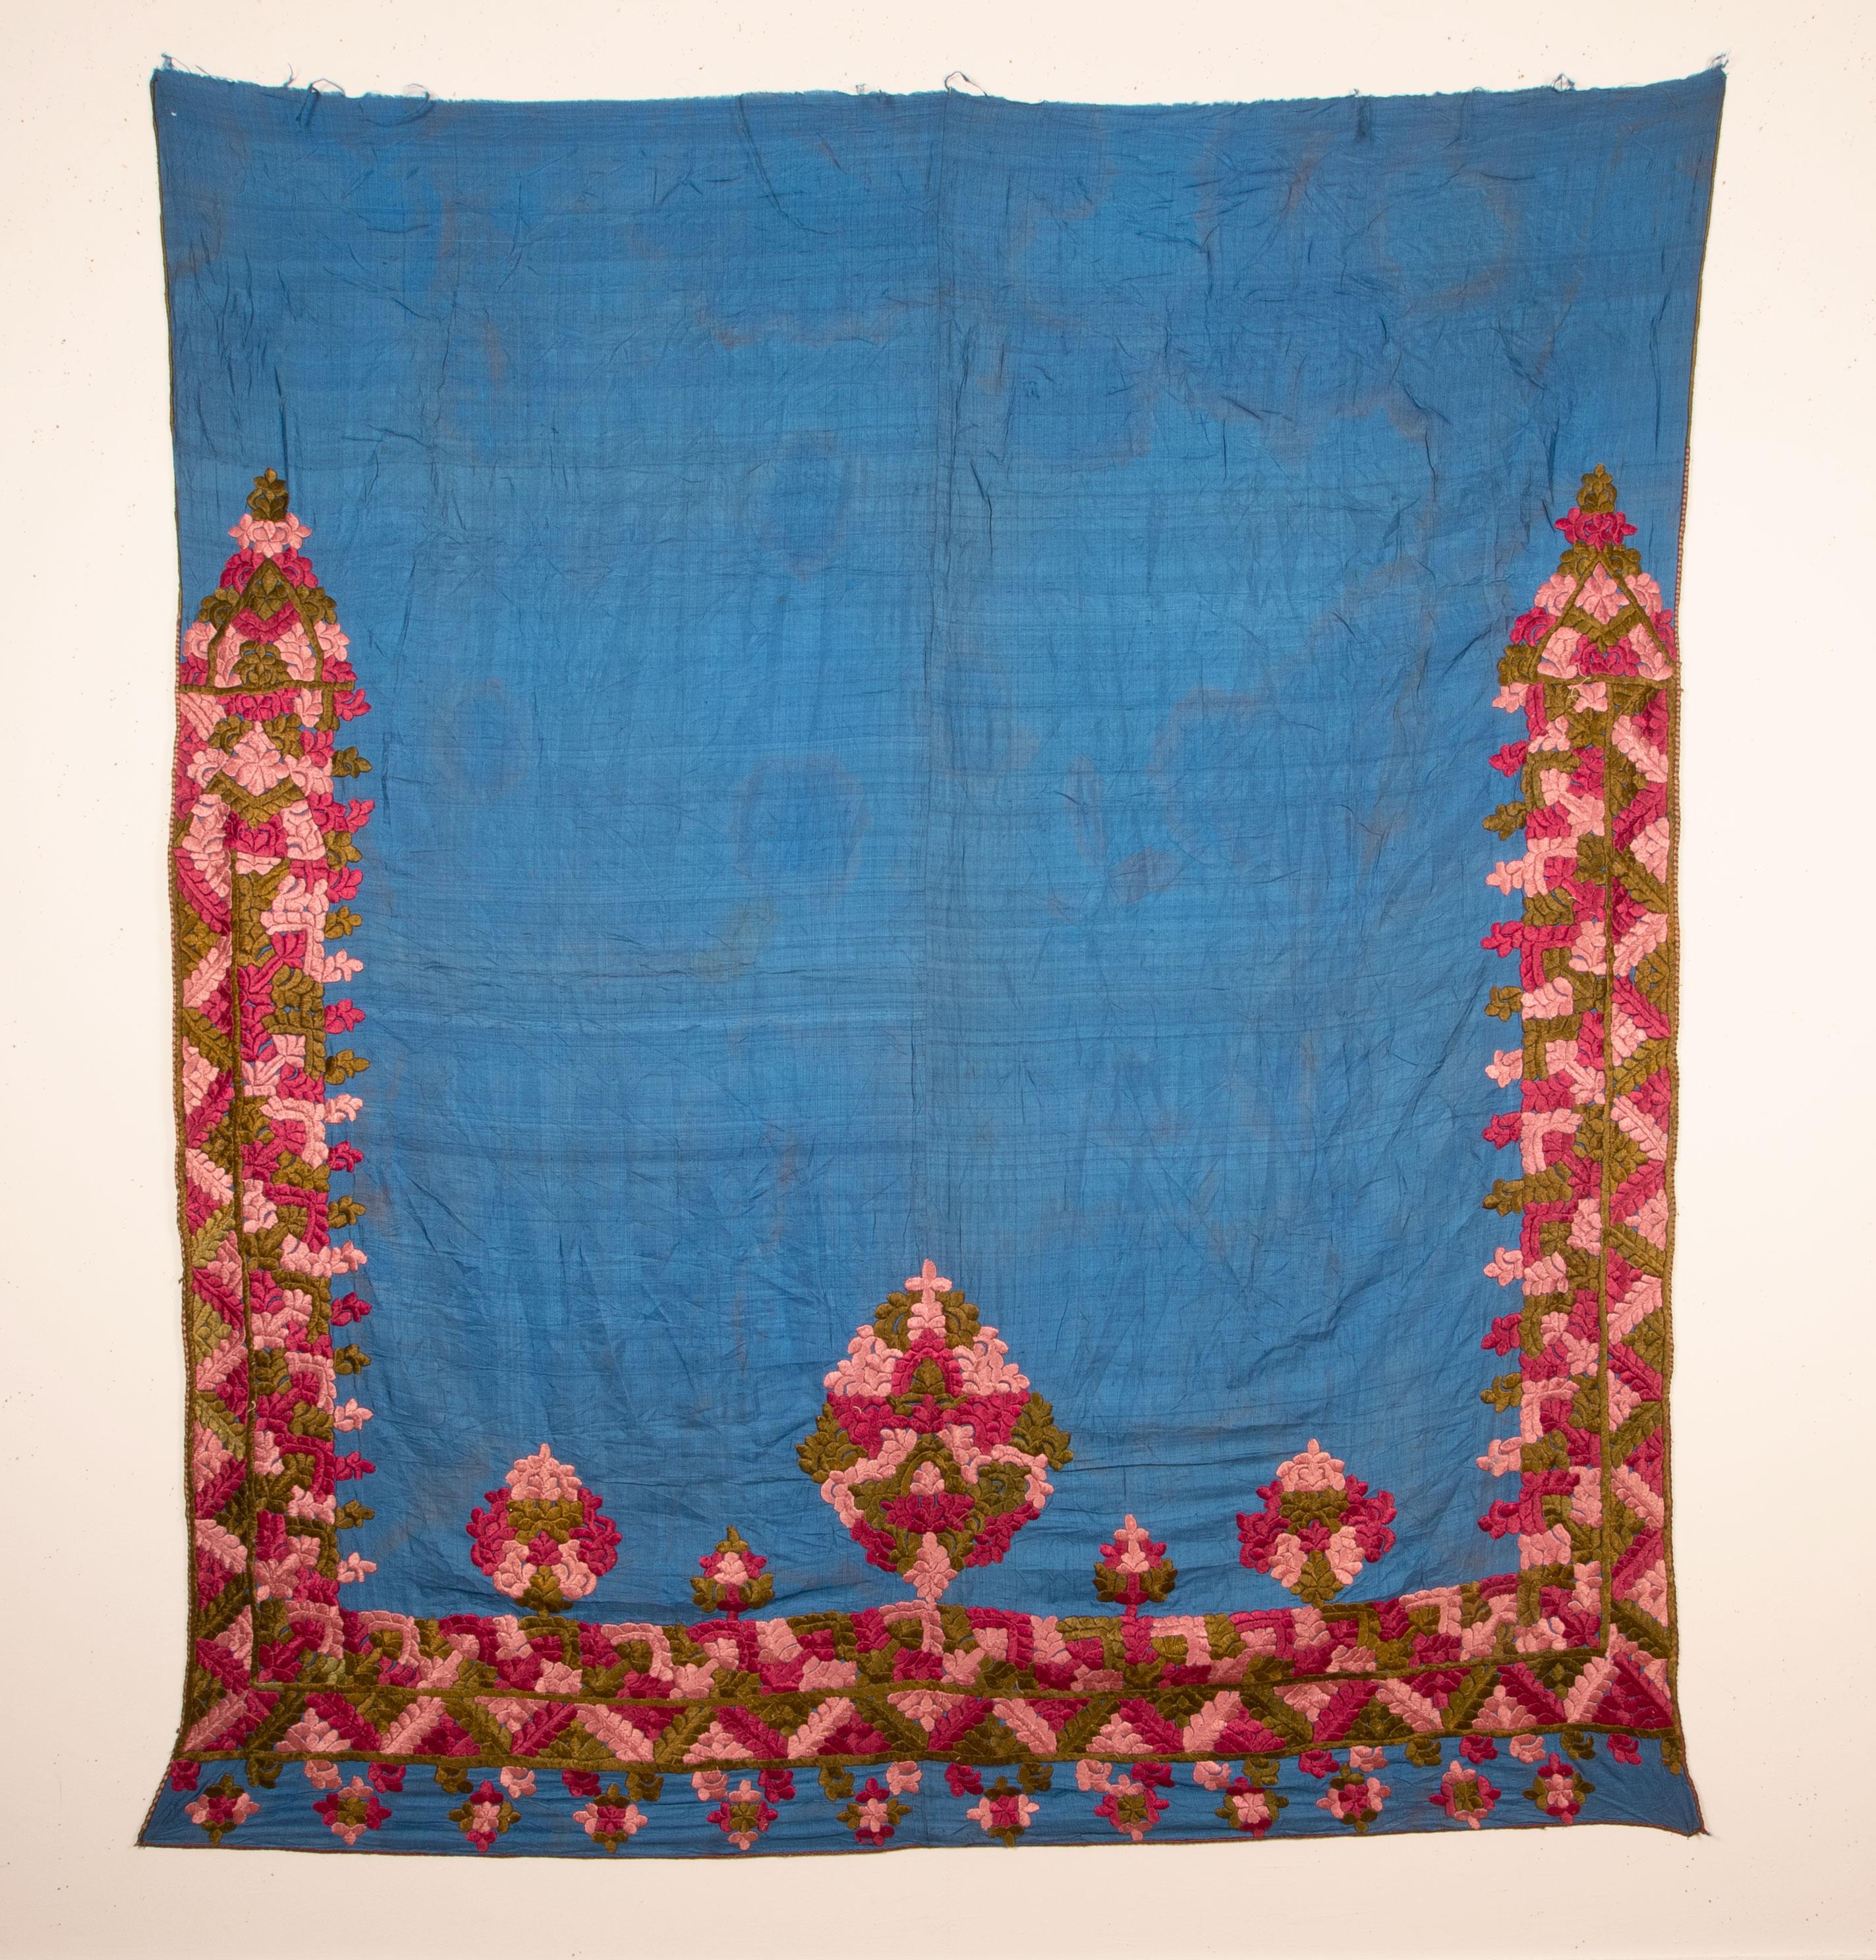 This is silk embroidery on a silk blue background. A rare item to come by.